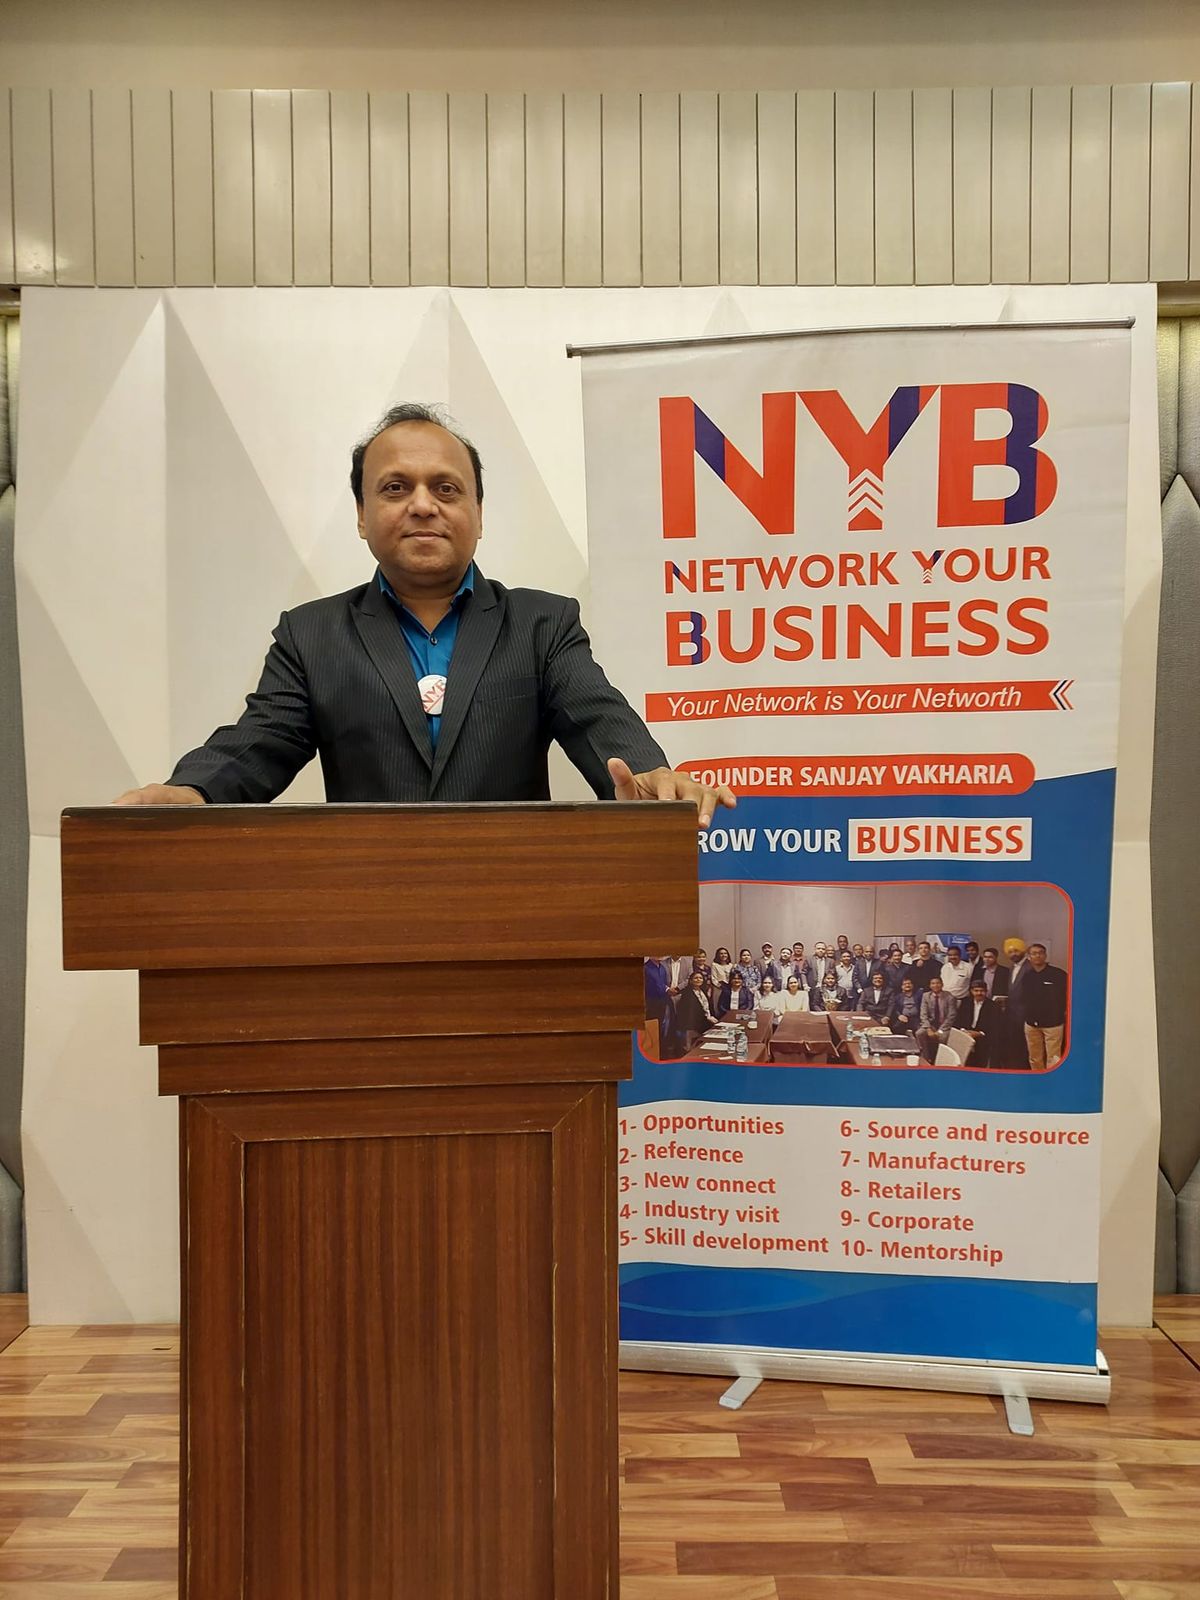 NYB Network Your Business Group Meeting